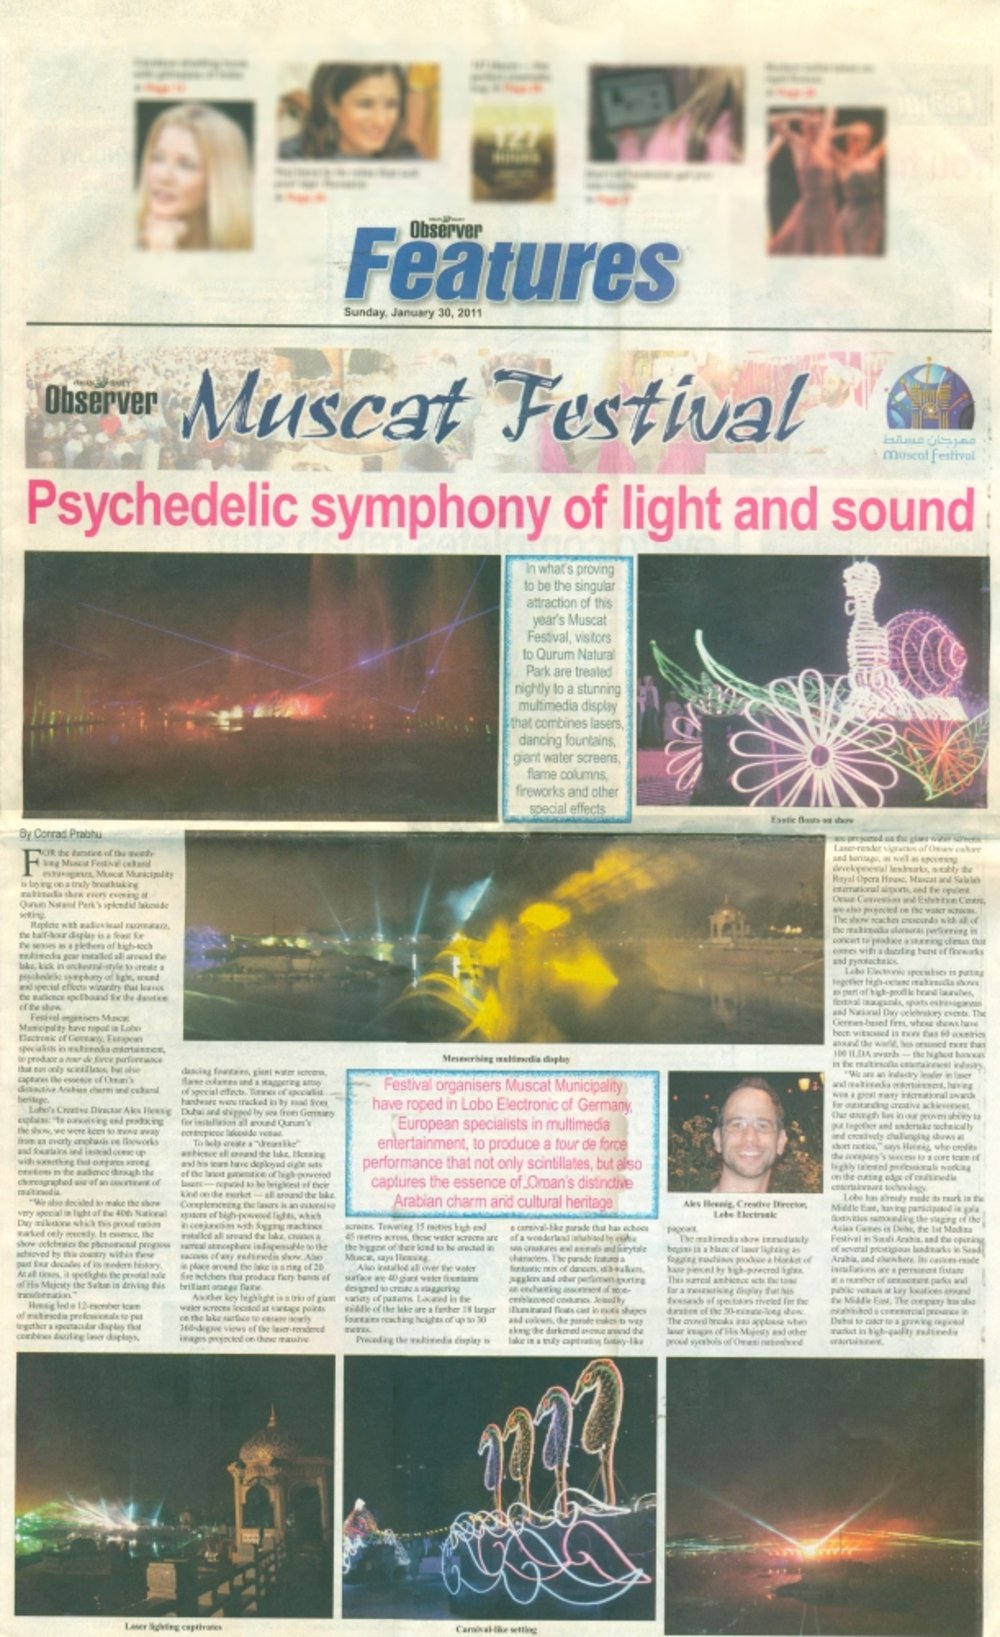 Oman Daily Observer Features 30 January 2011 Psychedelic symphony of light and sound